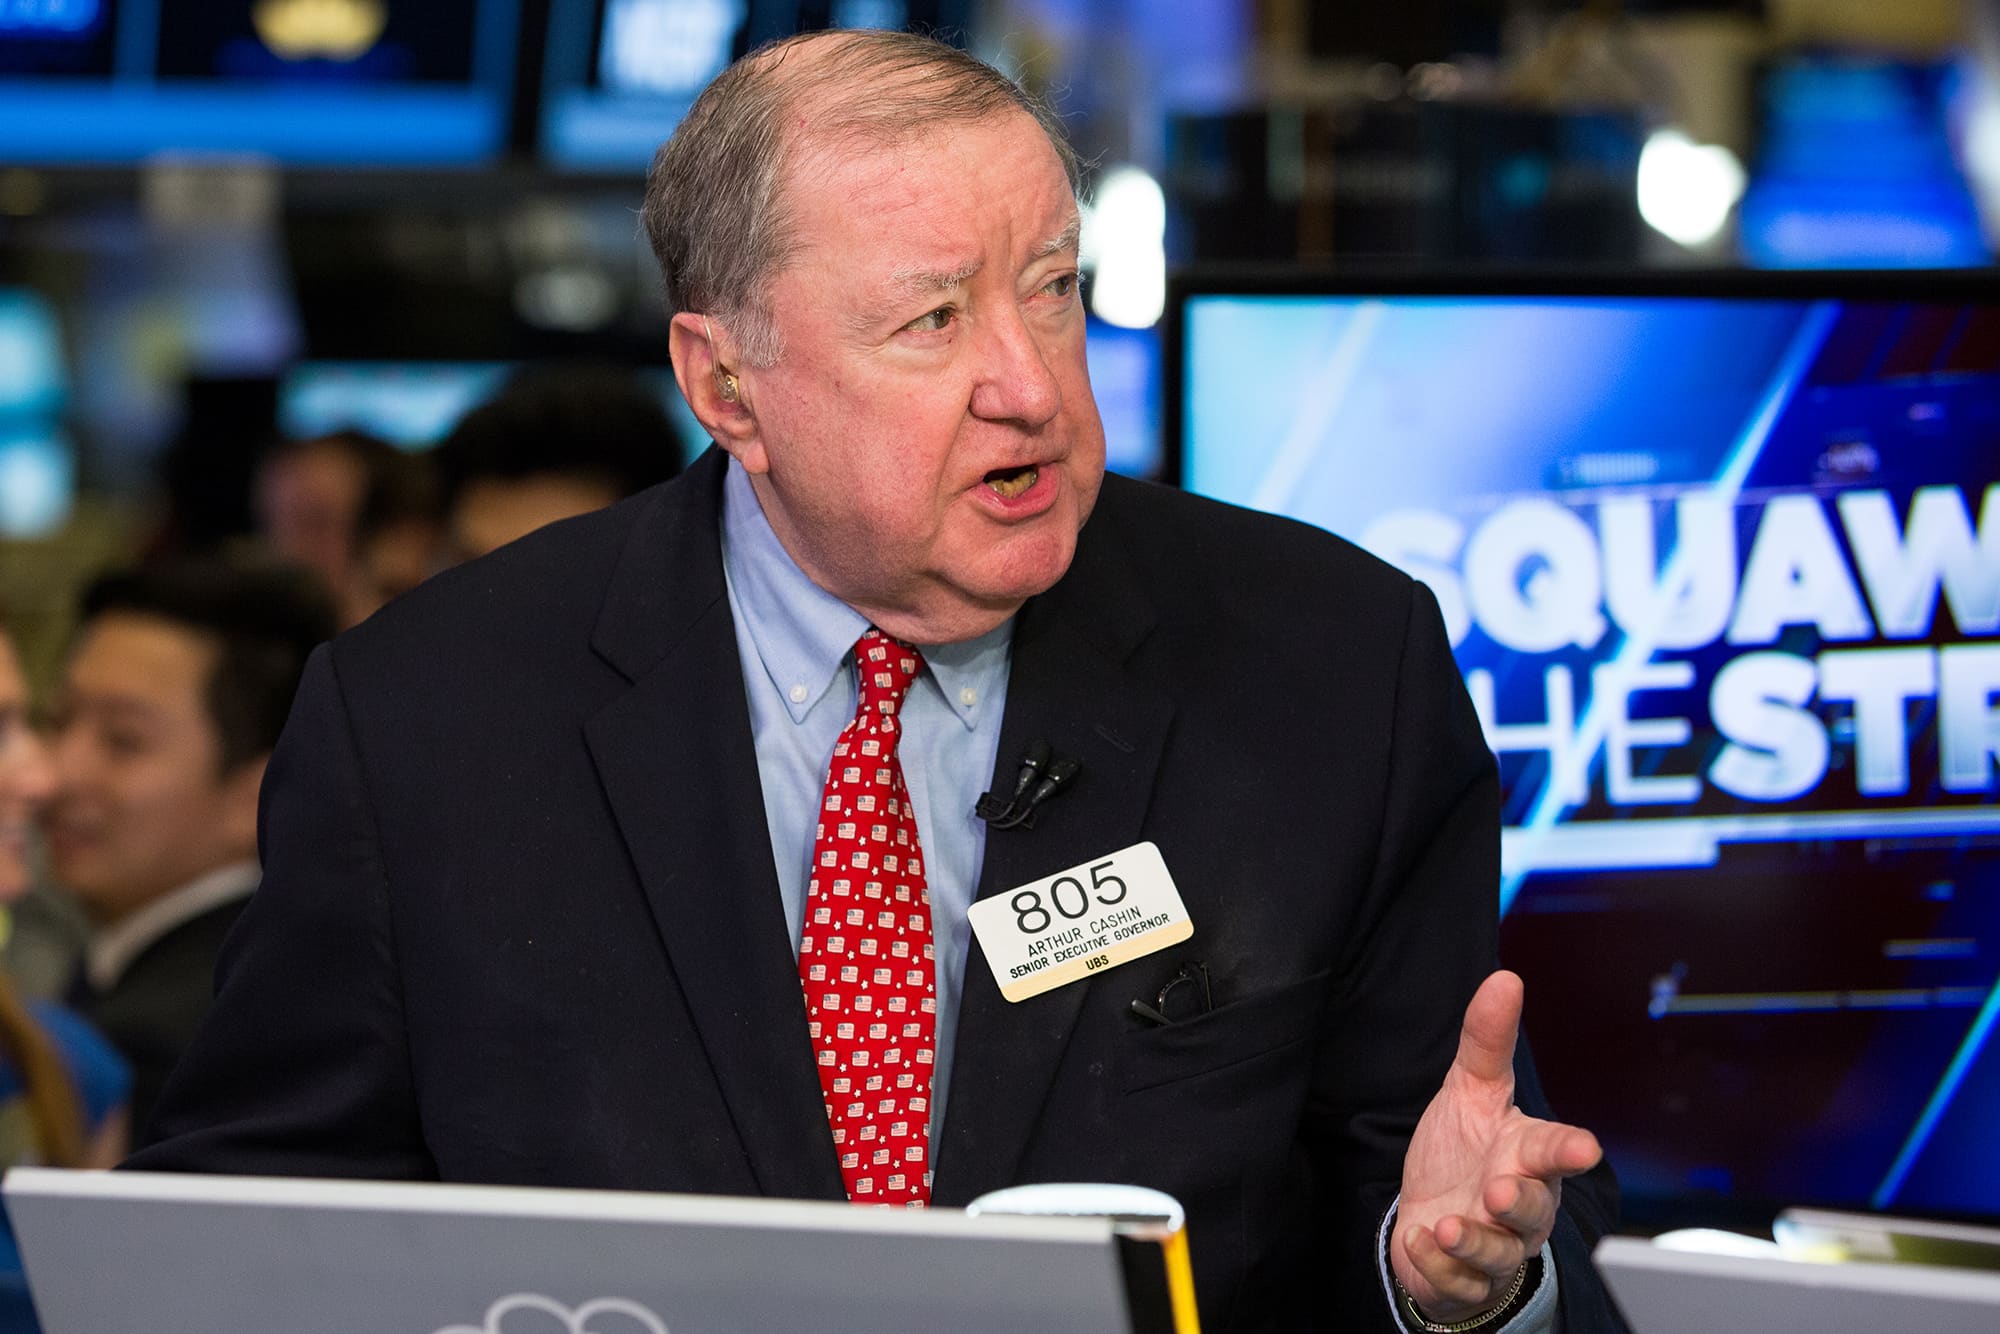 These are the key levels that UBS's Art Cashin will be looking at as the January rally unfolds